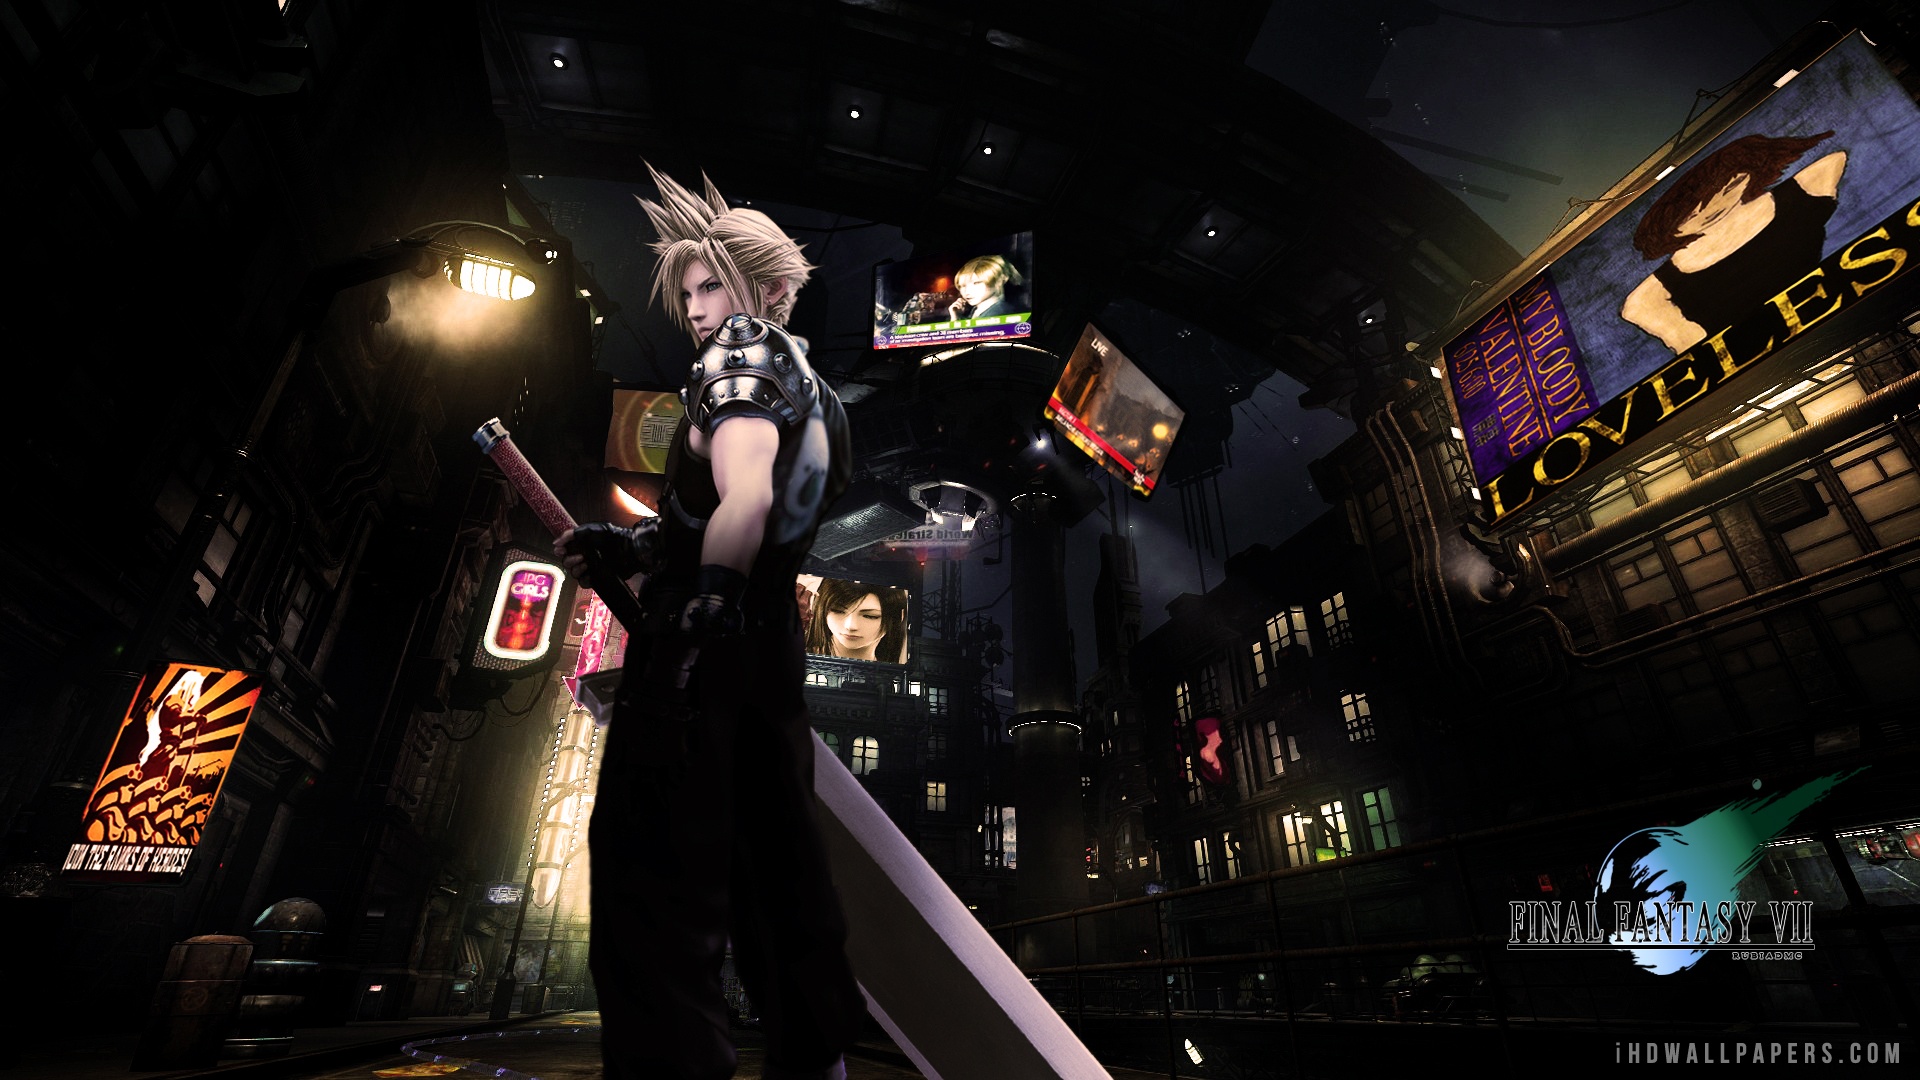 Free Download Final Fantasy Vii Wallpaper 19x1080 For Your Desktop Mobile Tablet Explore 77 Ff7 Wallpapers Ffxiii Wallpaper Ff7 Remake Wallpaper Awesome Ff7 Wallpaper